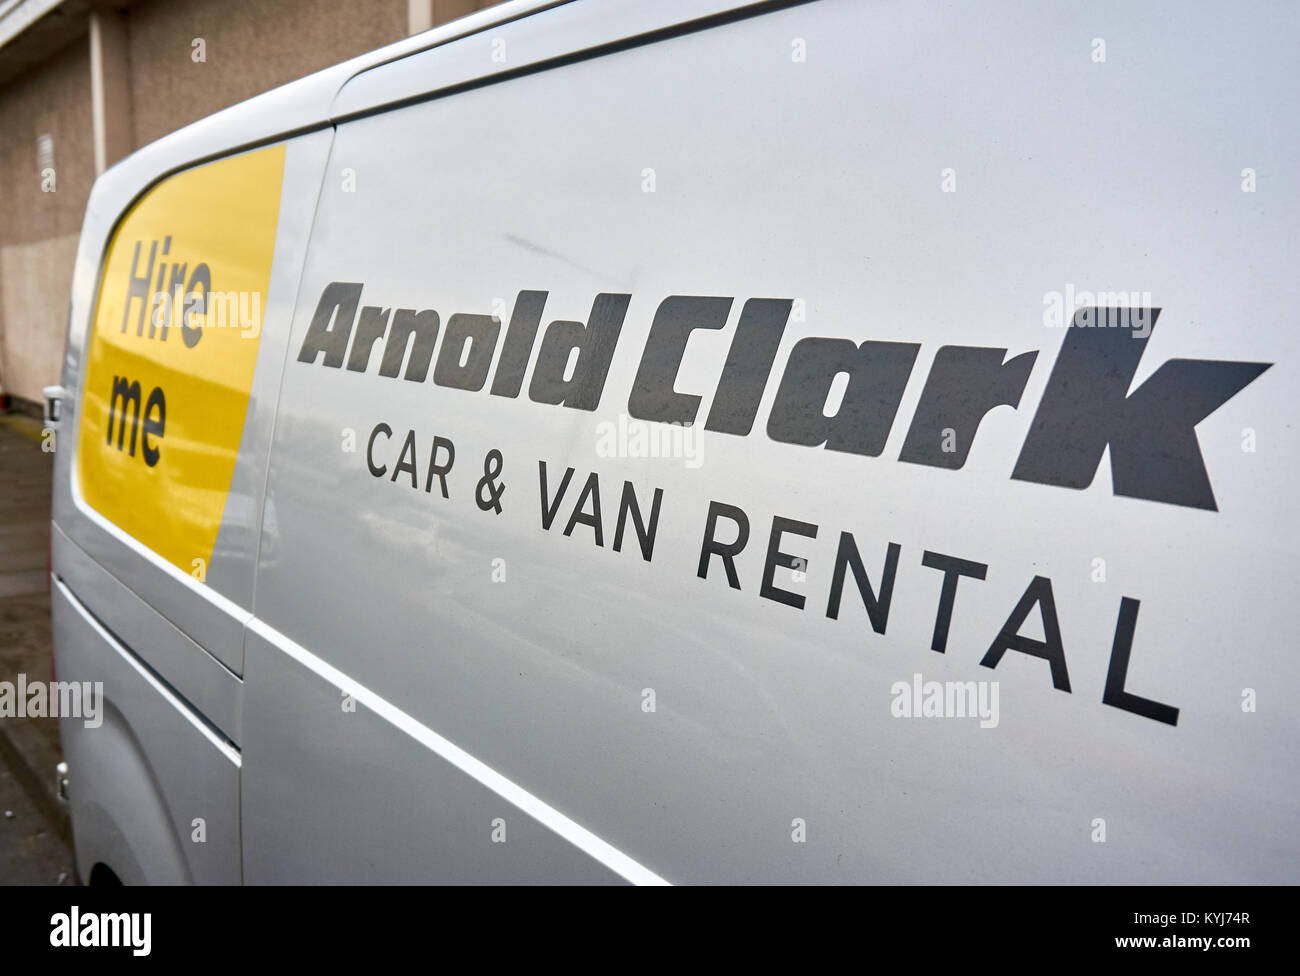 Arnold Clark High Resolution Stock Photography and Images - Alamy